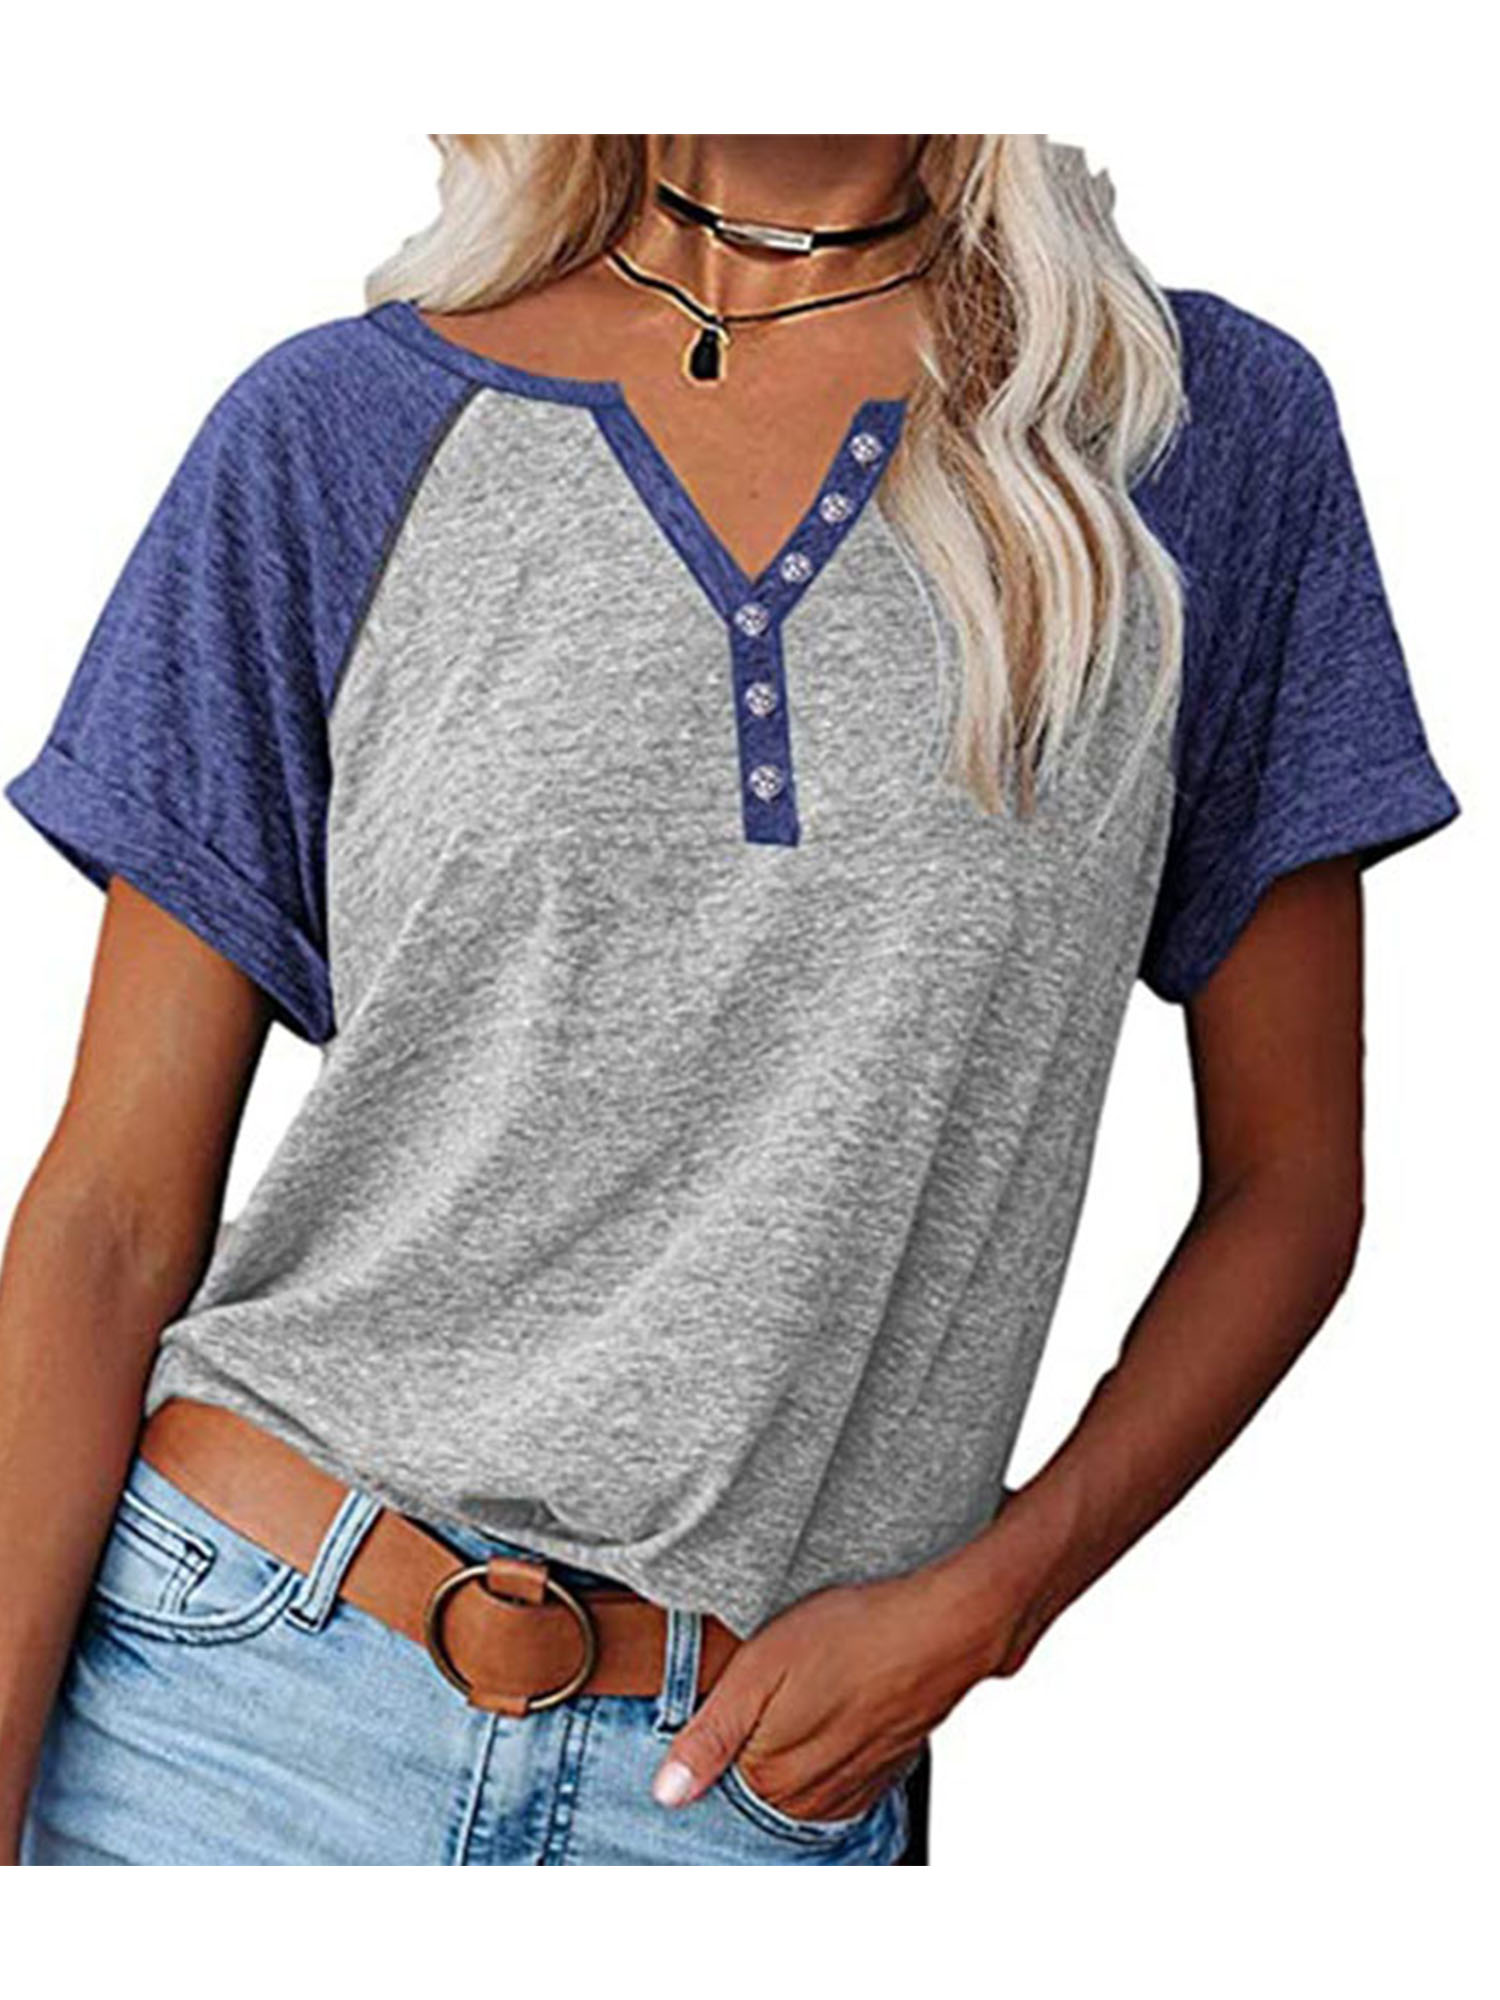 Women Ladies Casual Tops Short Sleeve Color Block T-shirt V Neck Tunic Blouse Tee Ladies Stylish Sport Athletic Tops - image 1 of 3